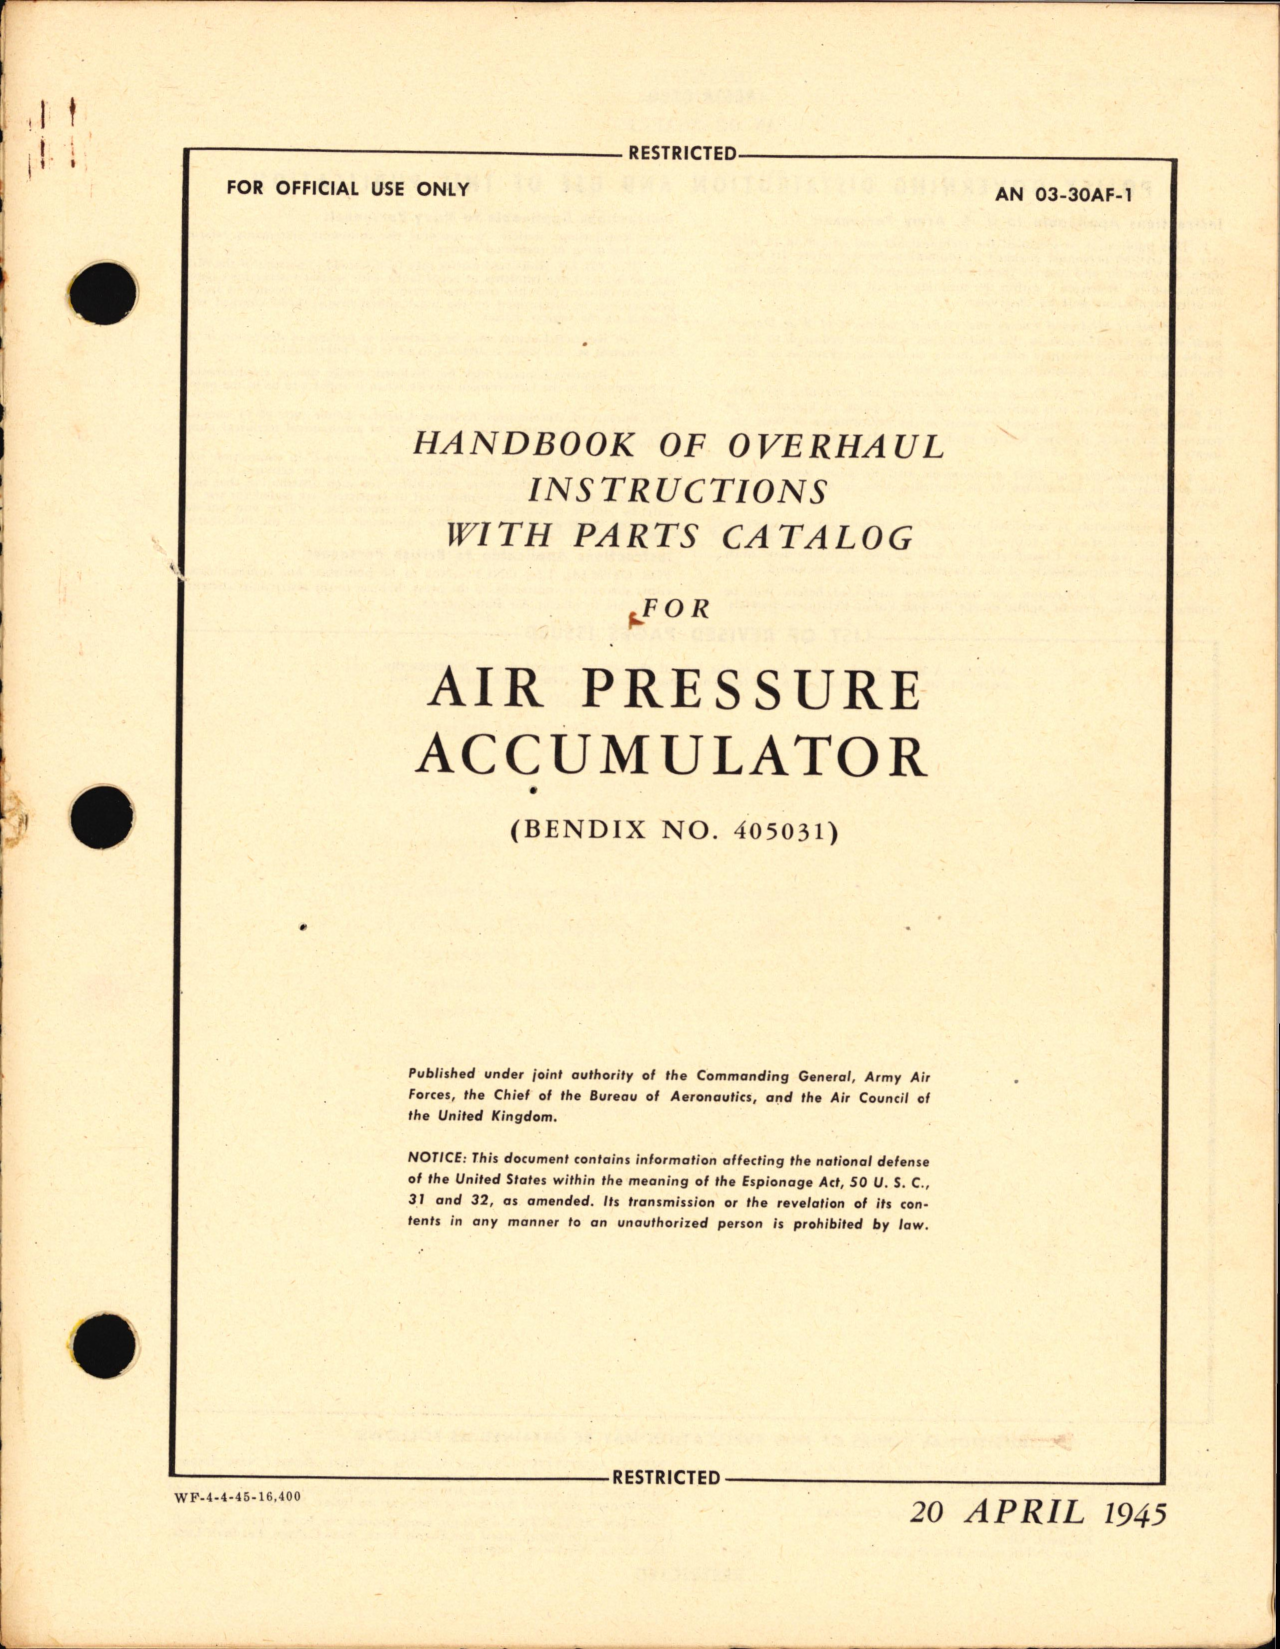 Sample page 1 from AirCorps Library document: Handbook of Overhaul Instructions with Parts Catalog for Air Pressure Accumulator NO. 405031